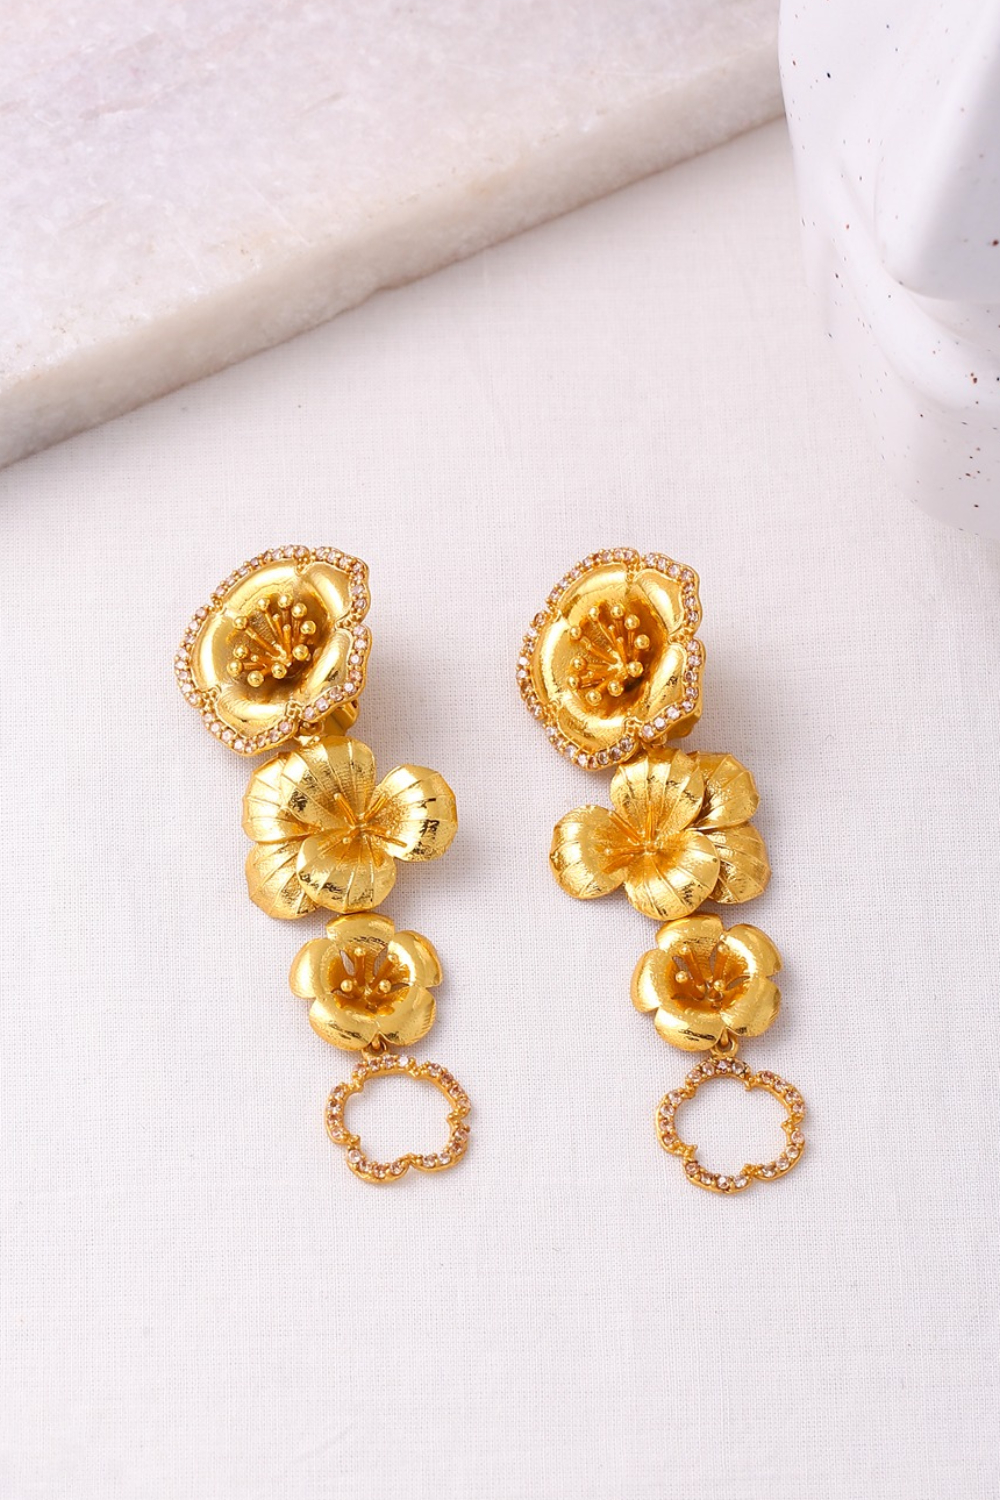 Gilded Pansy Earrings - Gold Textured Finish